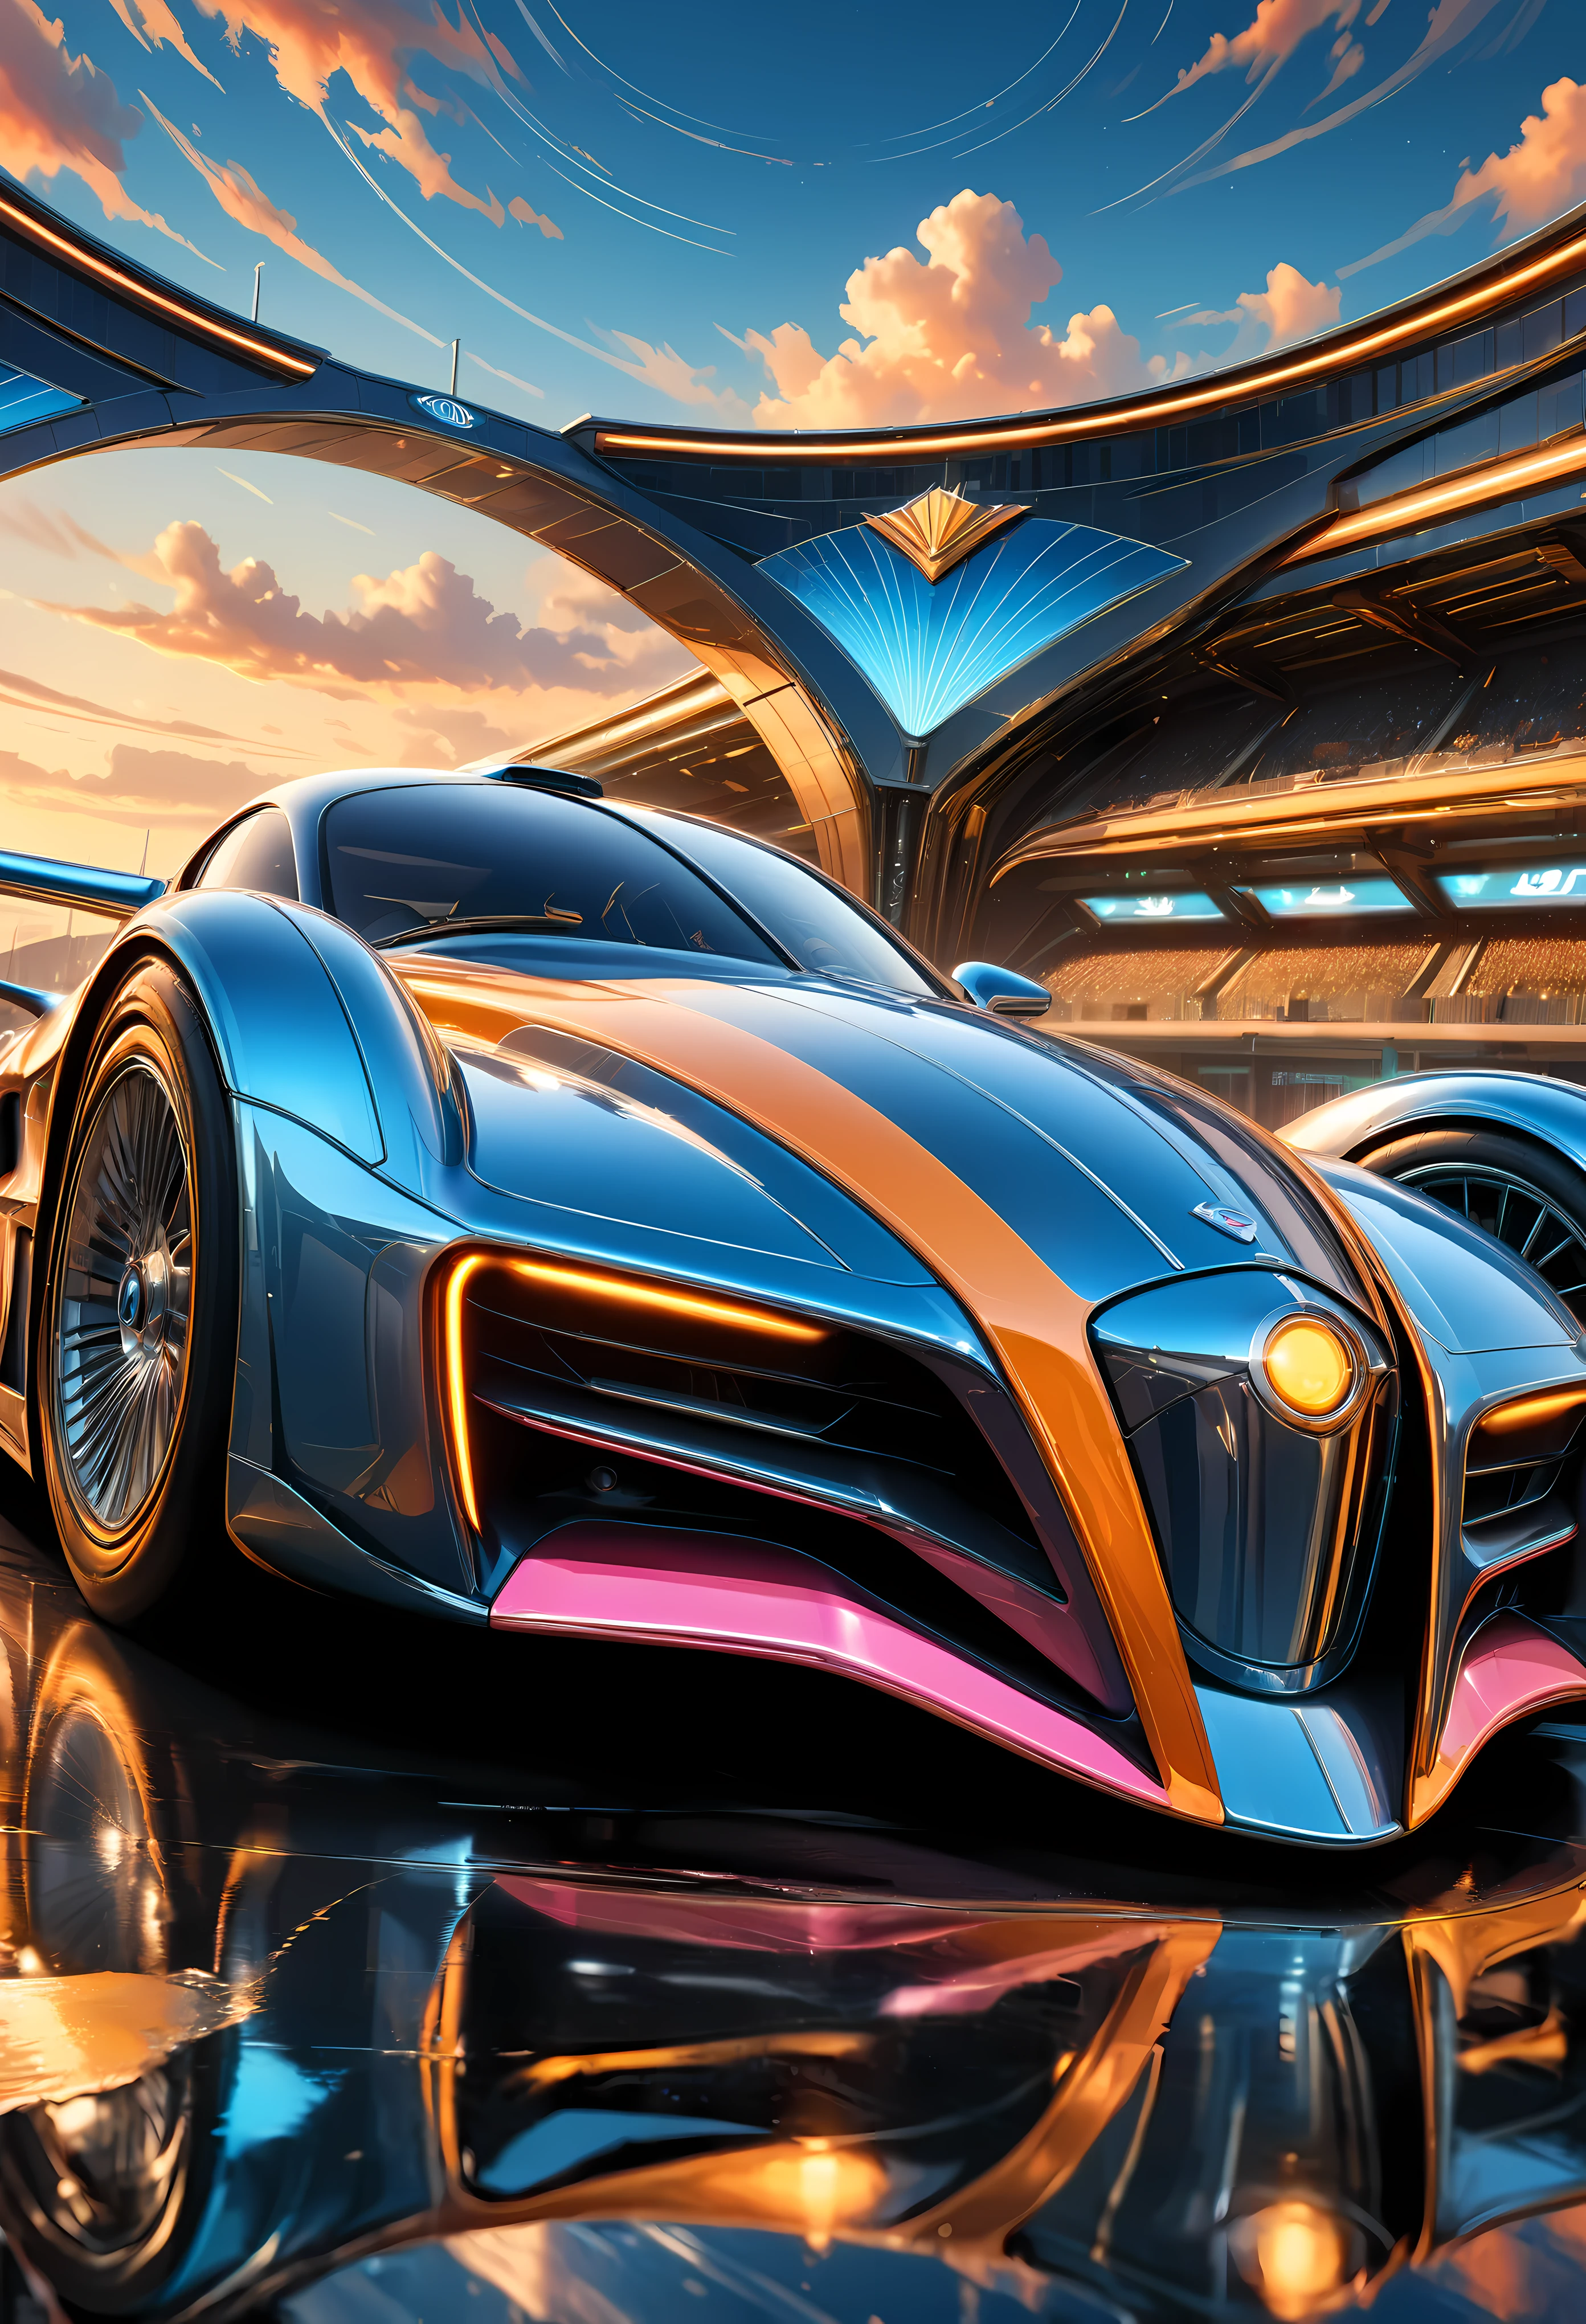 ((art deco style flying race car):1.5), art deco style science fiction, background is futuristic stadium, ((futuristic stadium):1.2) (best quality,4k,8k,highres,masterpiece:1.2),ultra-detailed,(realistic,photorealistic,photo-realistic:1.37),HDR,UHD,studio lighting,ultra-fine painting,sharp focus,physically-based rendering,extreme detail description,professional,vivid colors,bokeh.

All captured with sharp focus. Rendered in ultra-high definition with UHD and retina quality, this masterpiece ensures anatomical correctness and textured skin with super detail. With a focus on high quality and accuracy, this award-winning portrayal captures every nuance in stunning 16k resolution, immersing viewers in its lifelike depiction. Avoid extreme angles or exaggerated expressions to maintain realism.